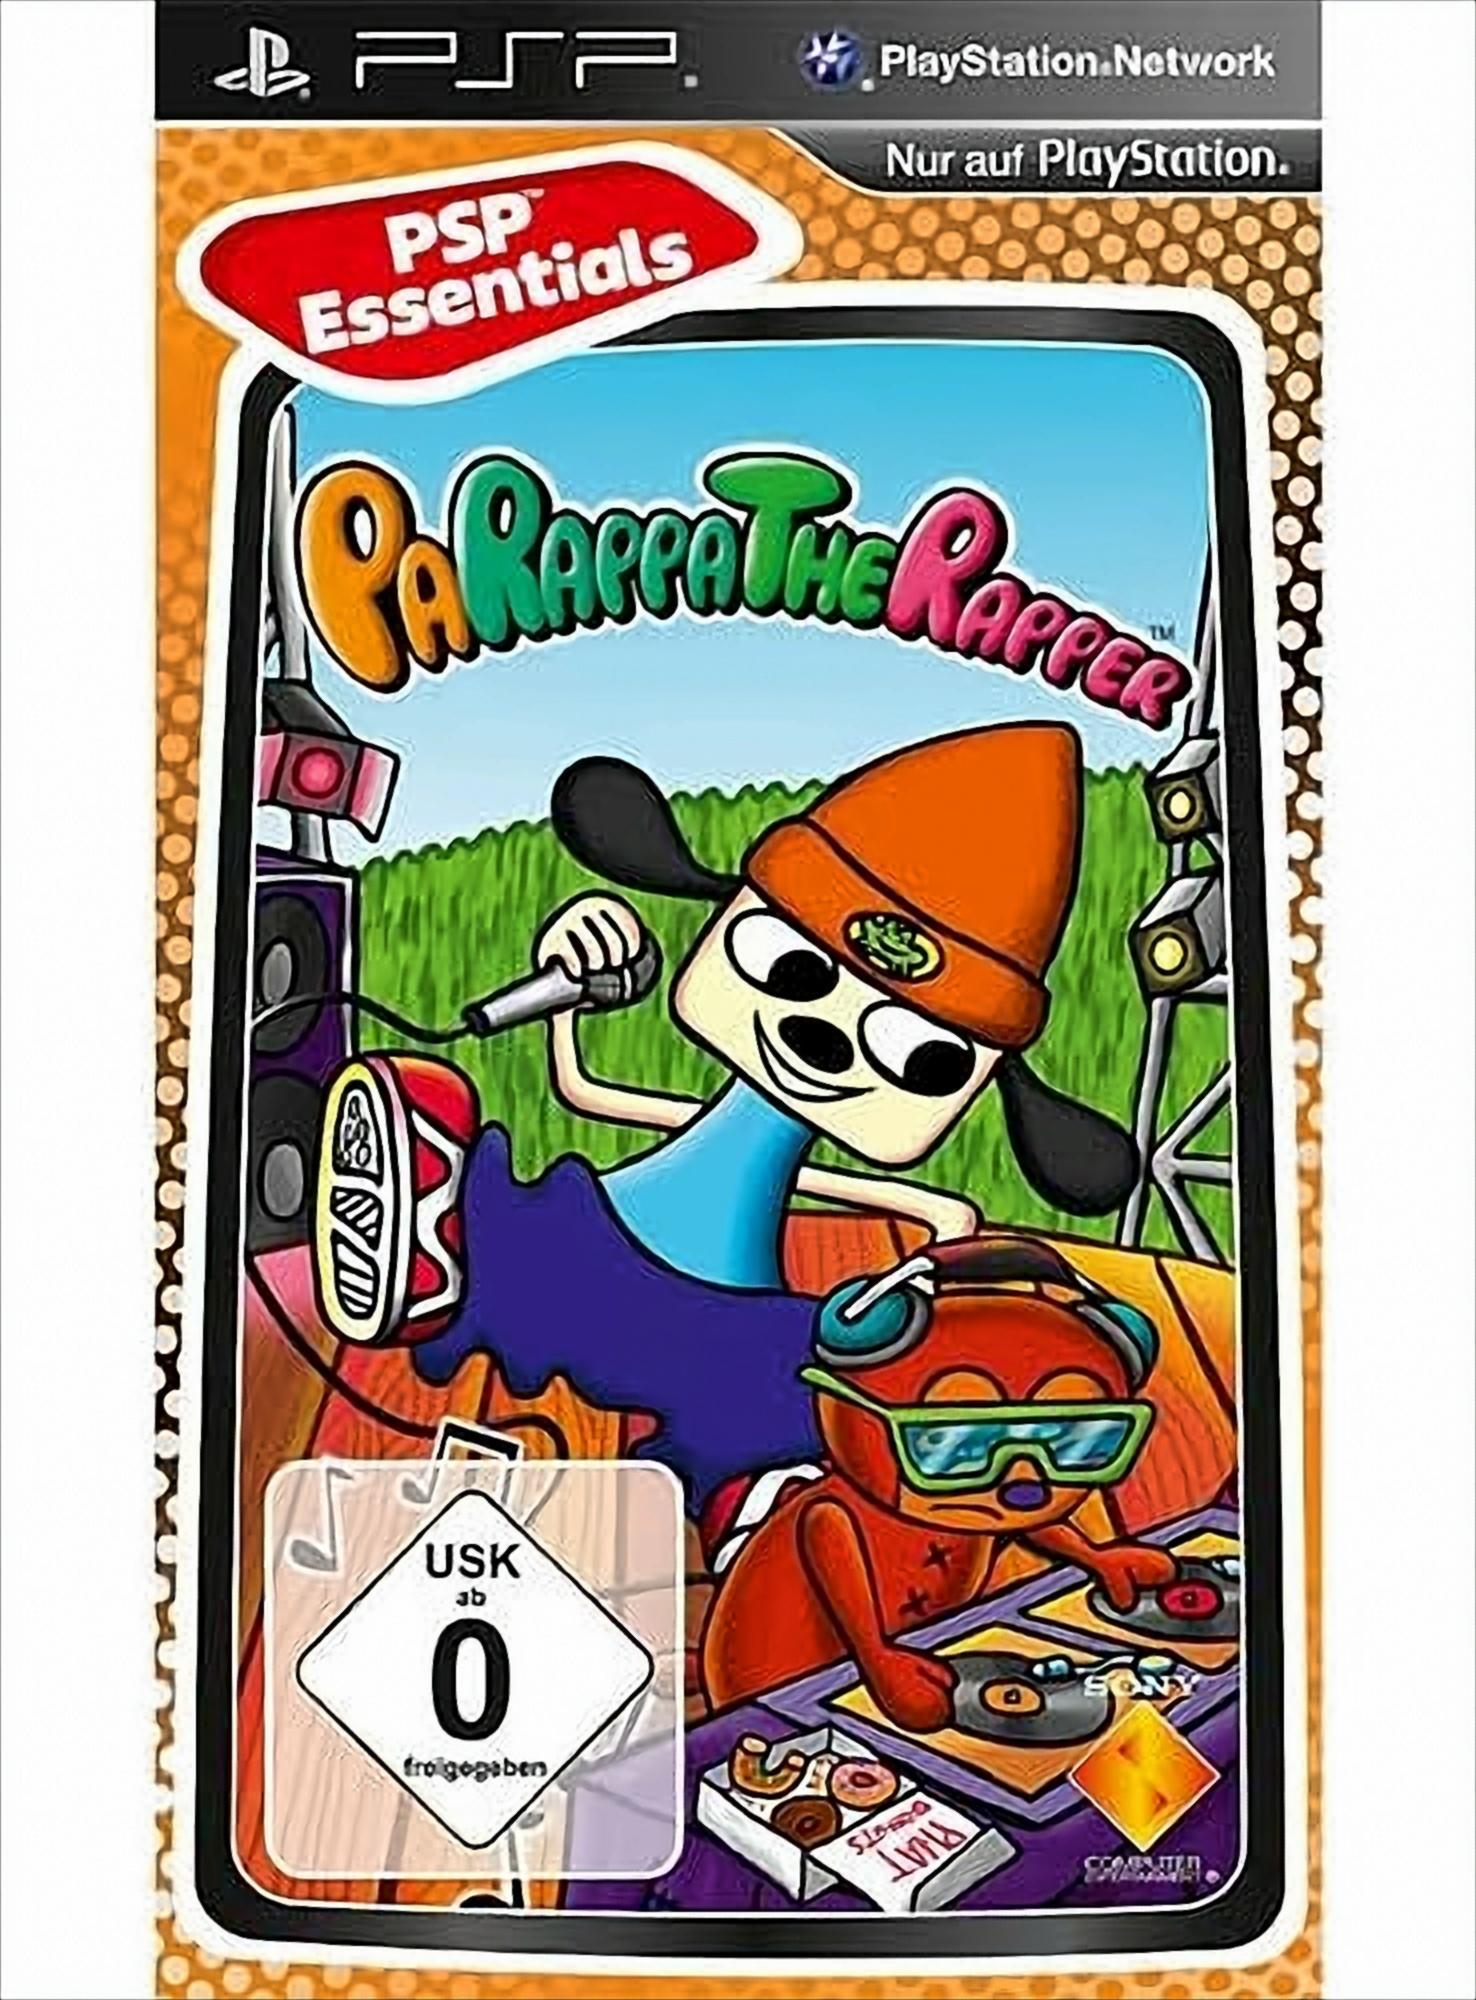 Rapper PaRappa [PSP] The -